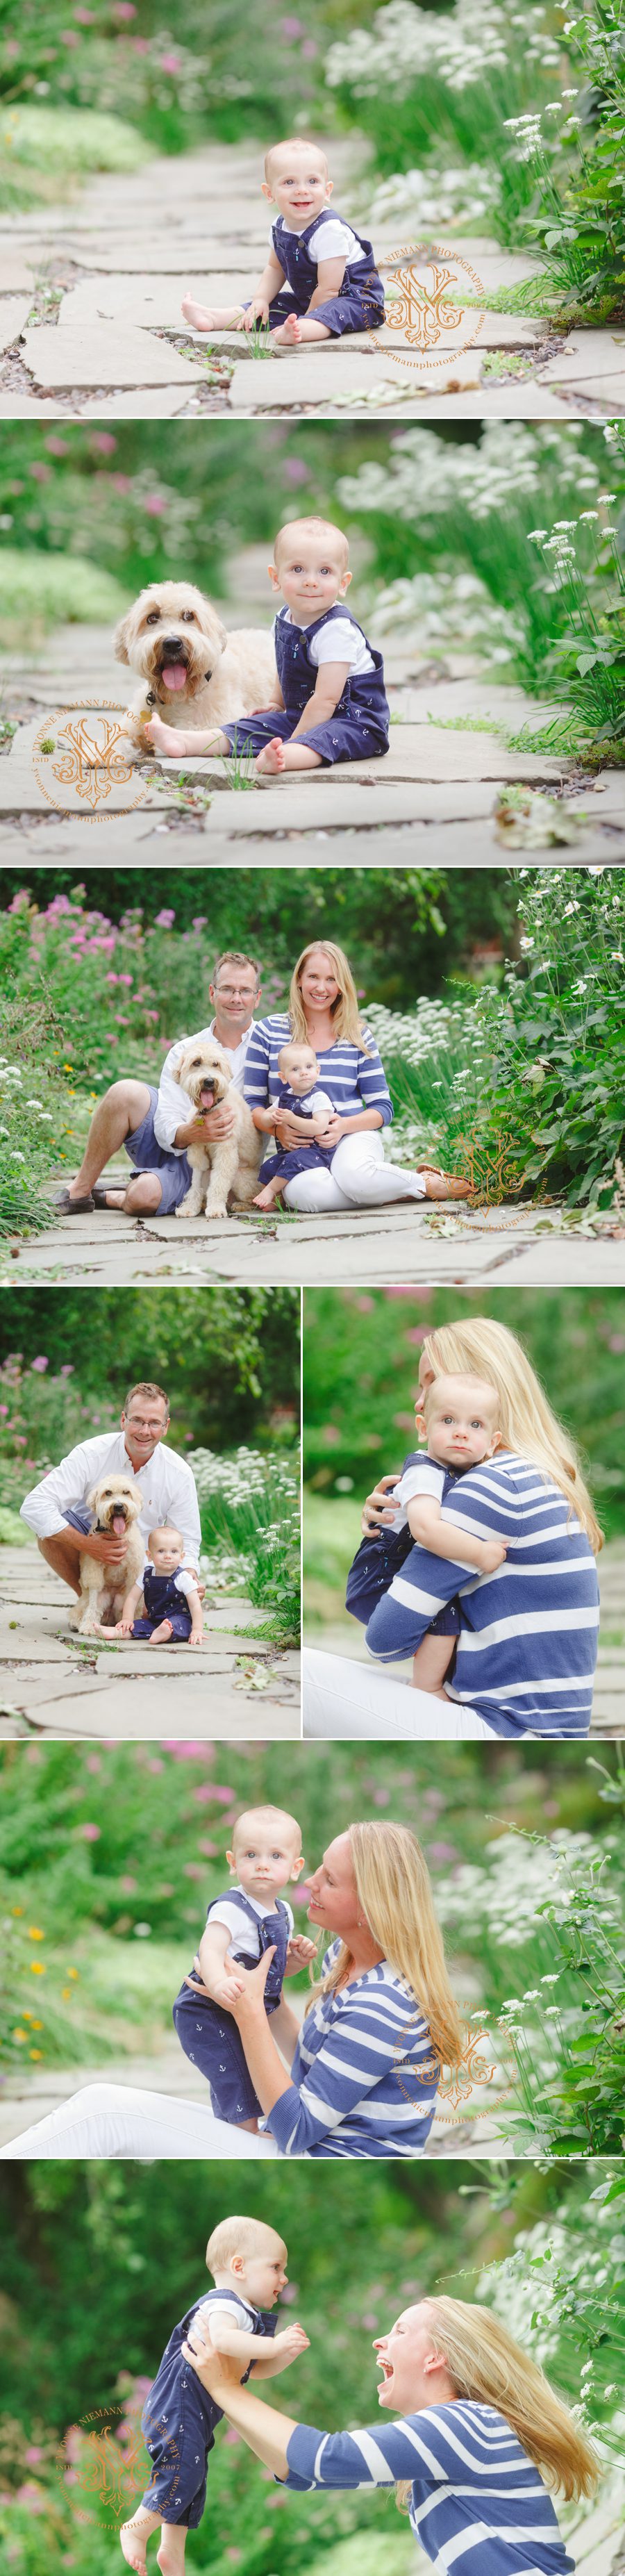 Athens, GA family photography highlighting connections of family with baby and dog.